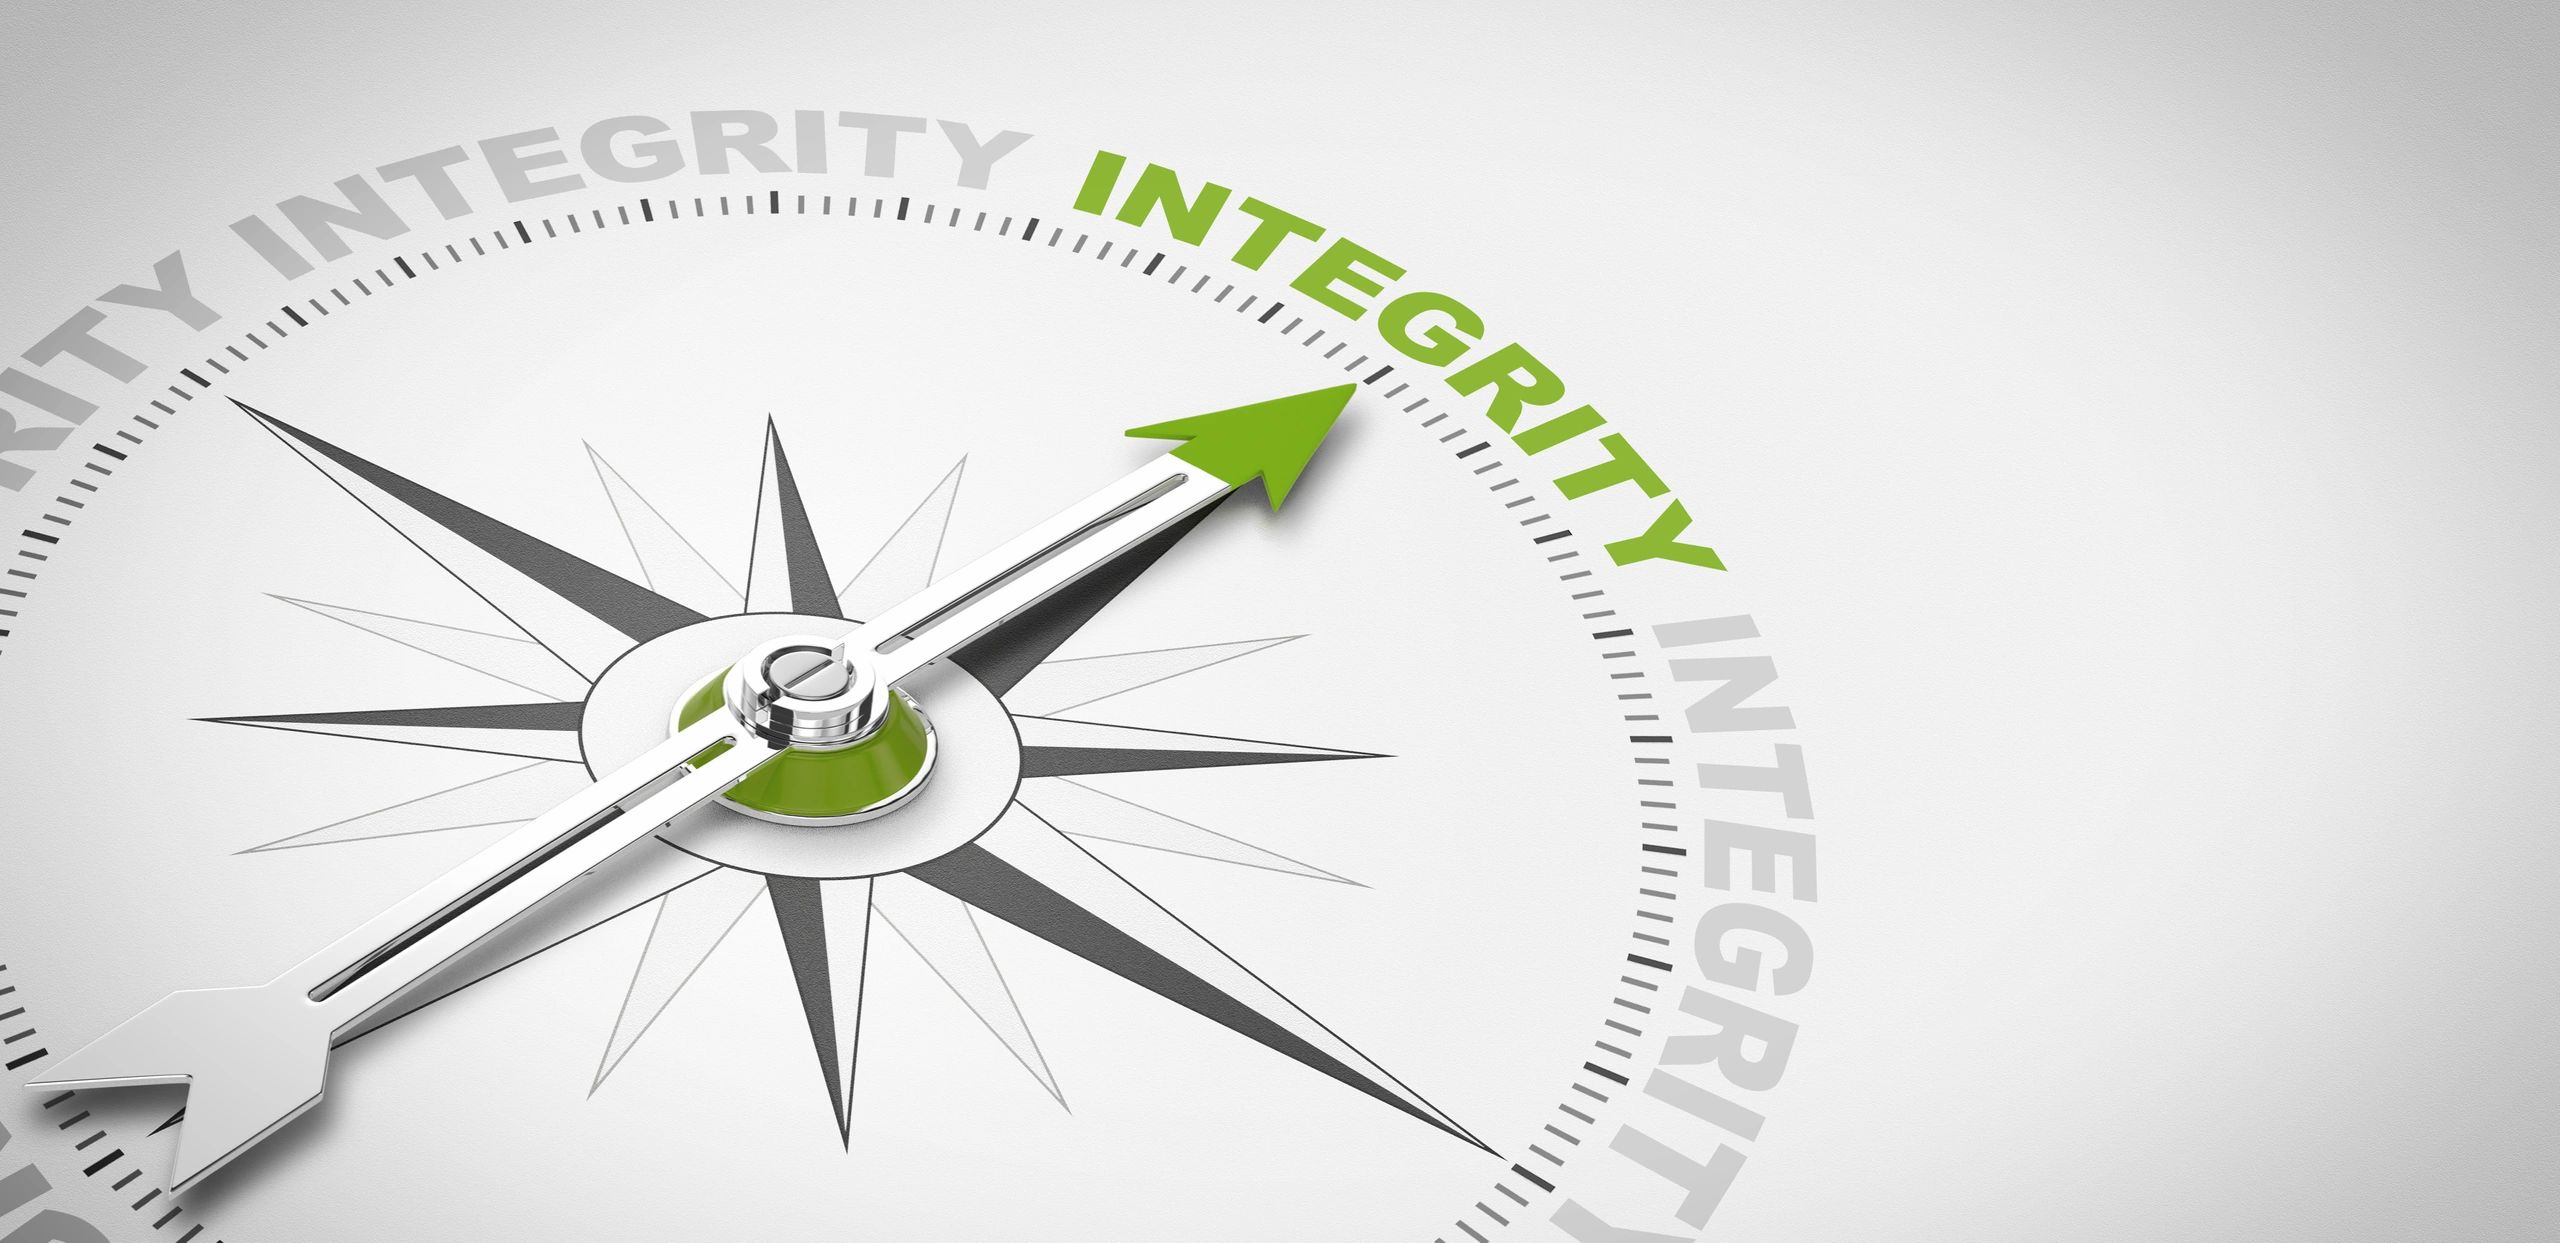 A compass pointing towards the word integrity